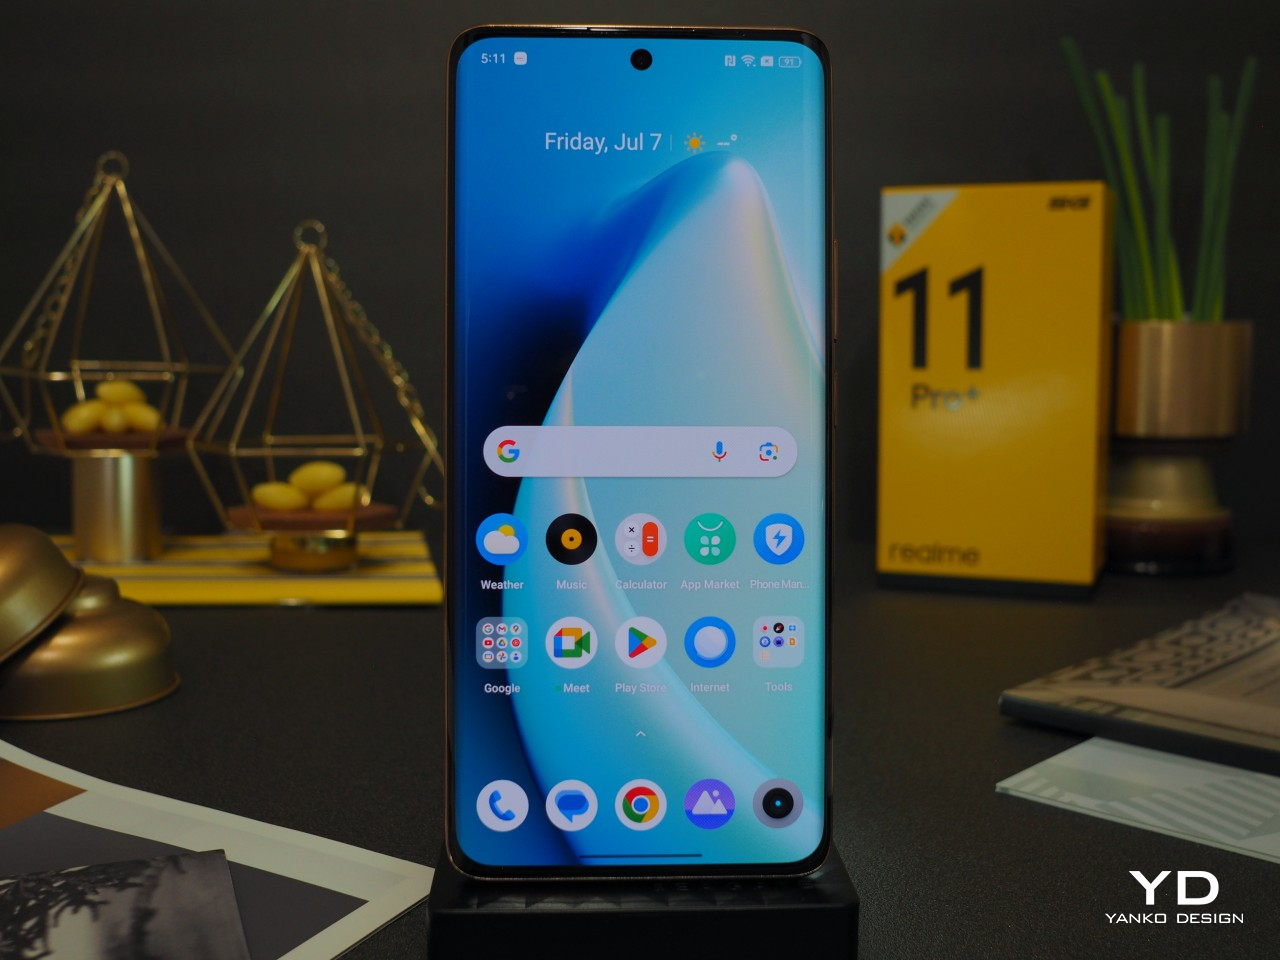 Realme 11 Pro Plus Review: It's All About The Style